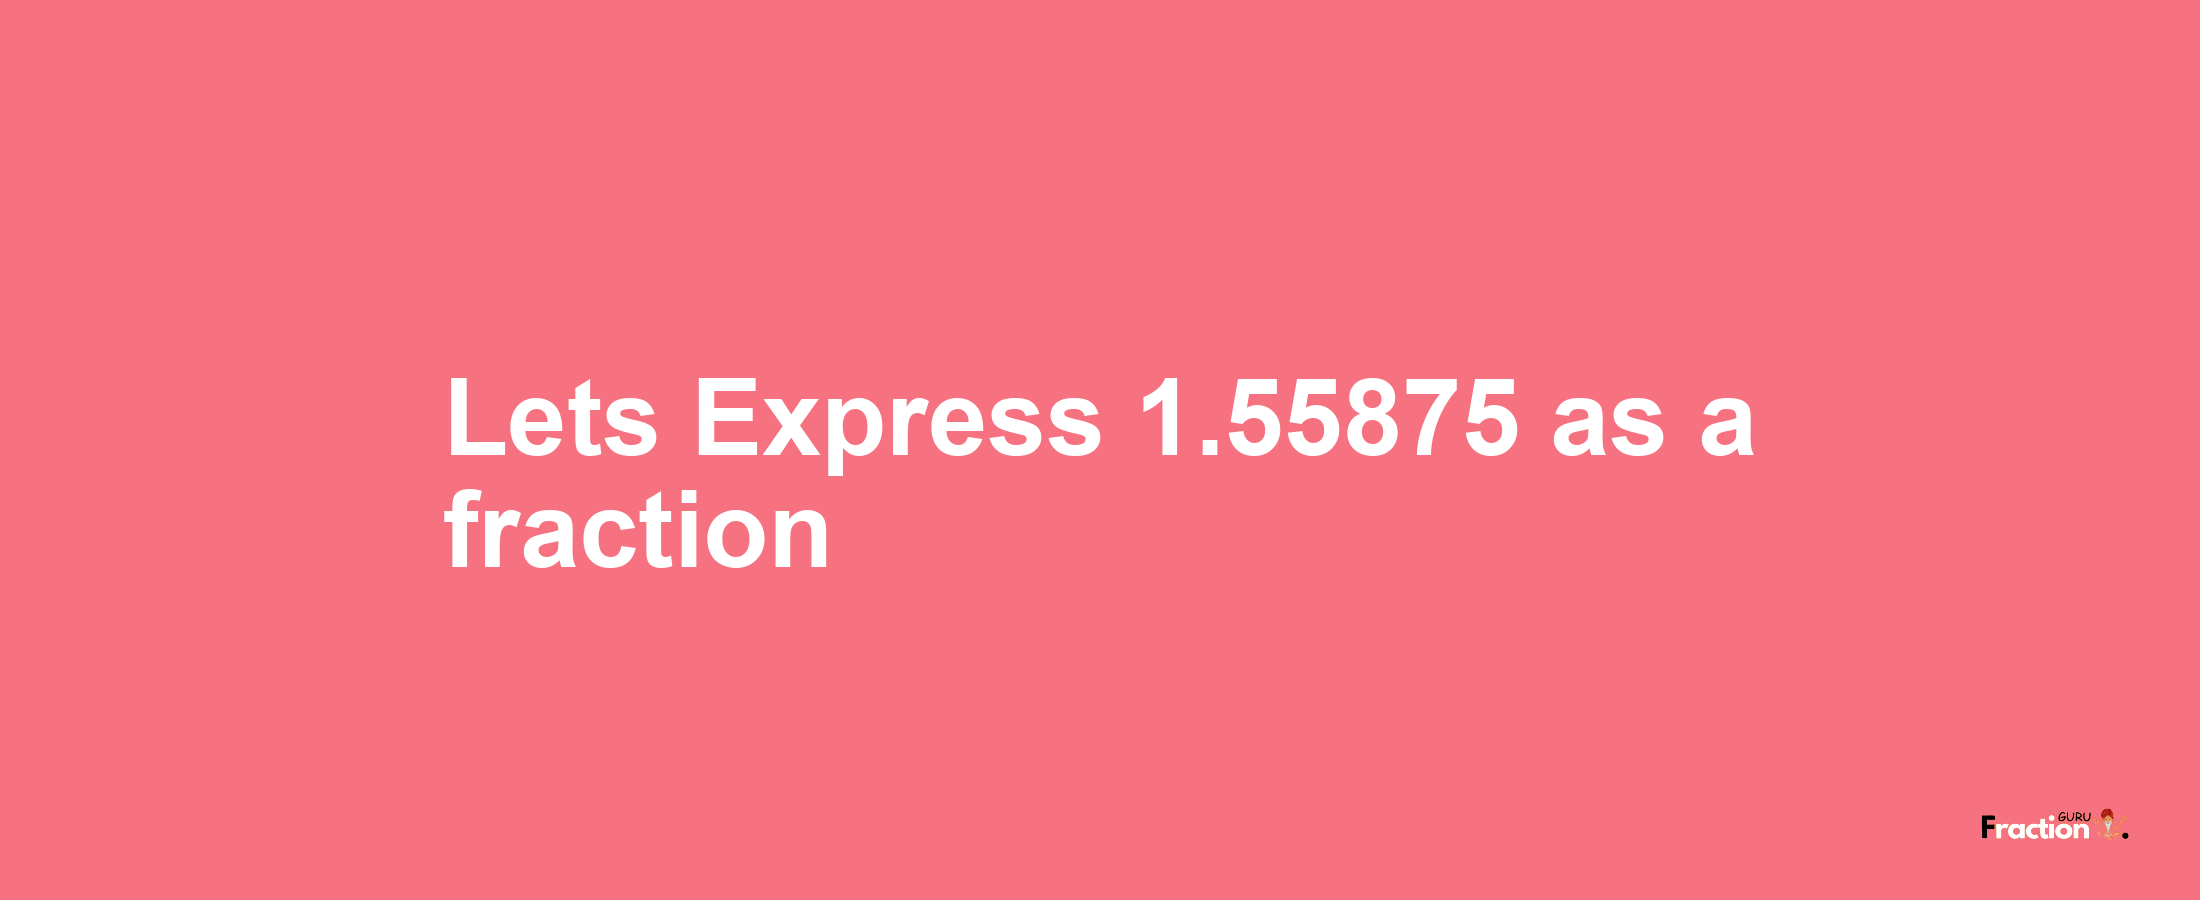 Lets Express 1.55875 as afraction